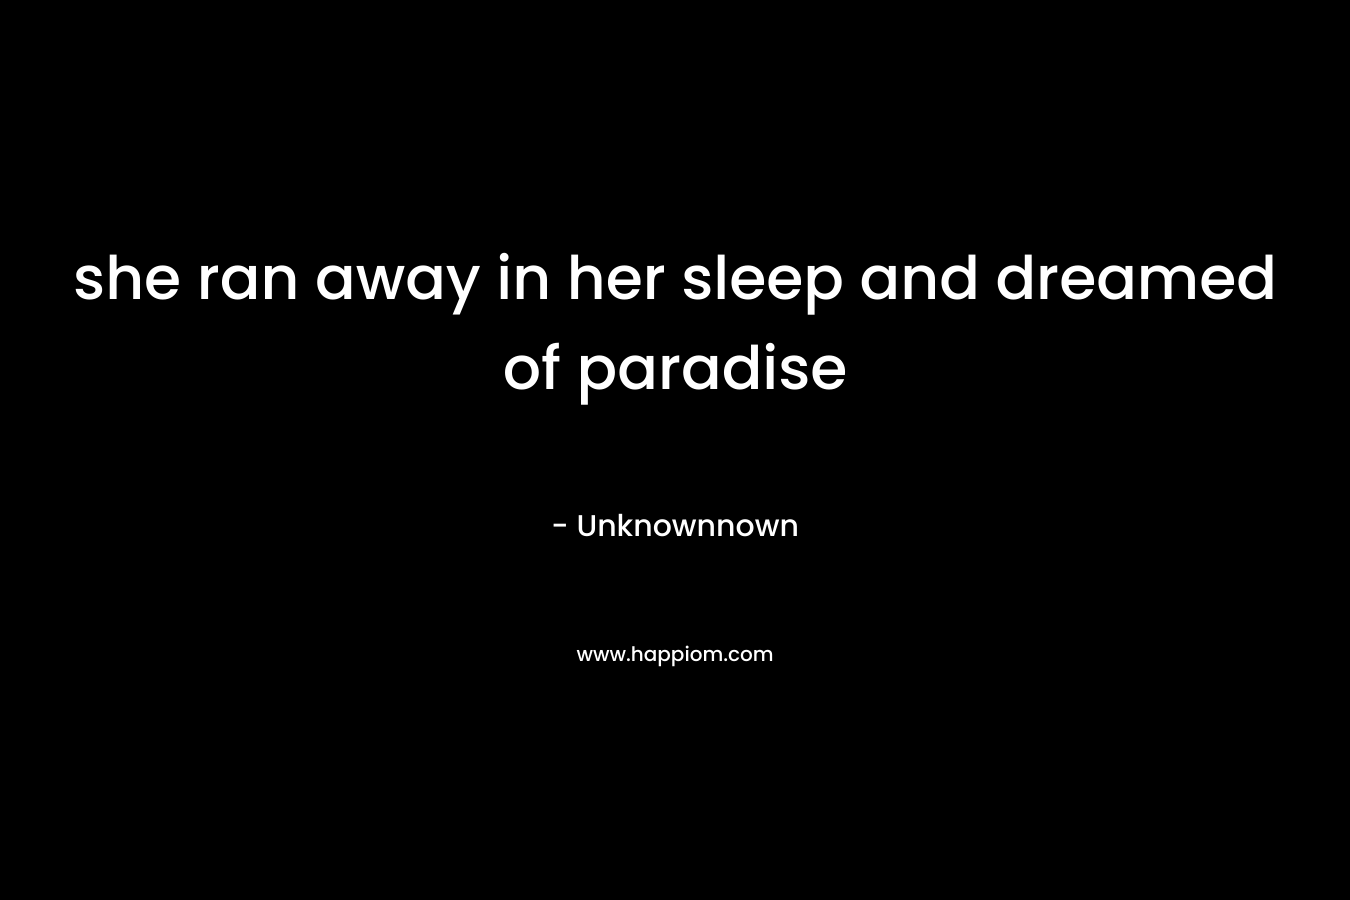 she ran away in her sleep and dreamed of paradise